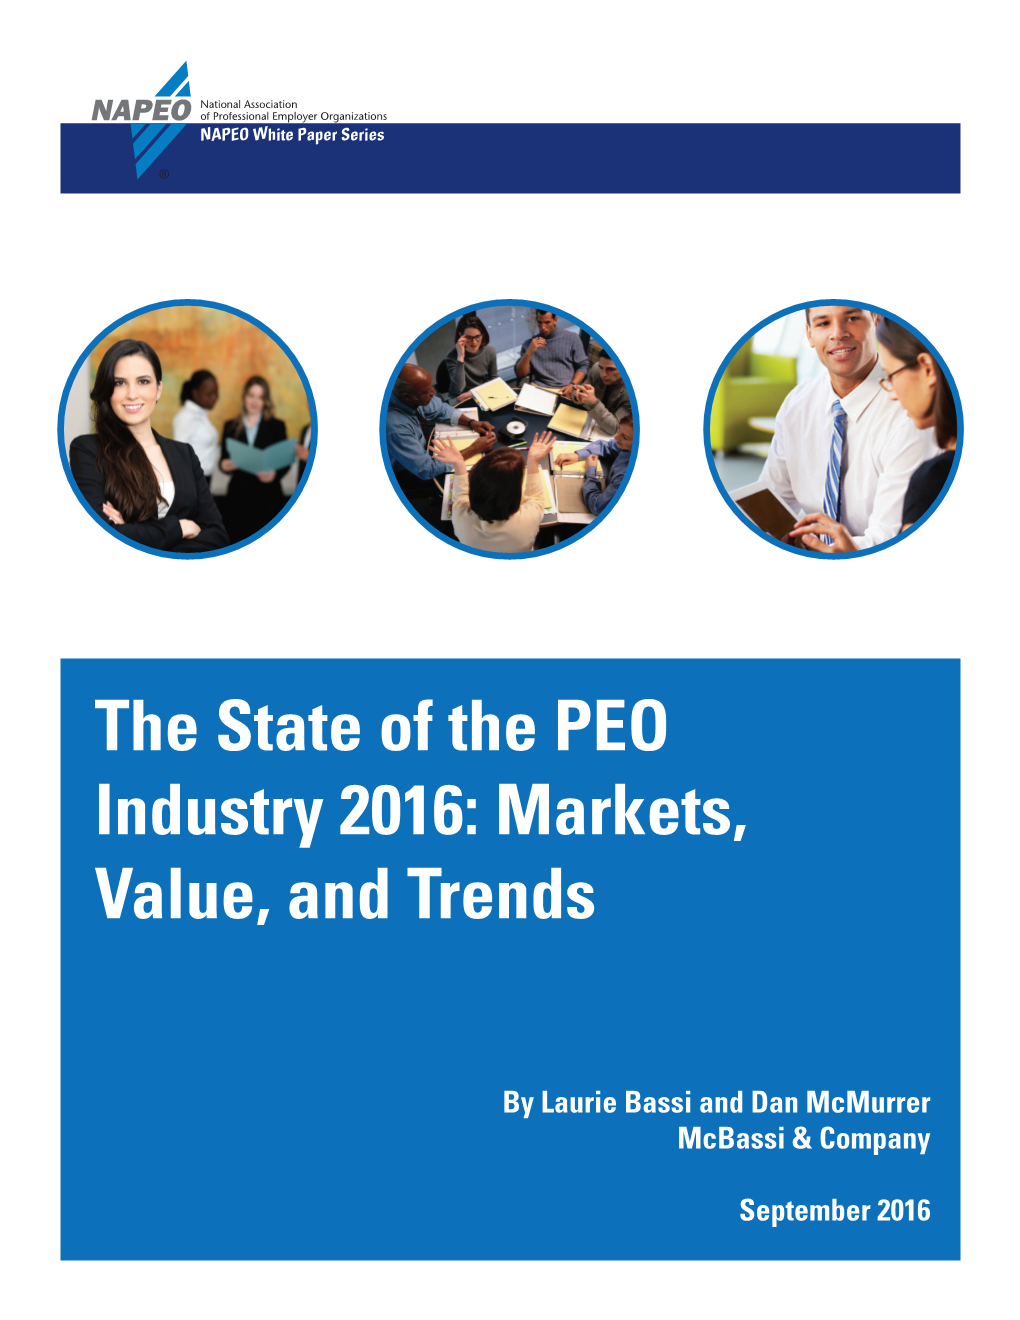 The State of the PEO Industry 2016: Markets, Value, and Trends